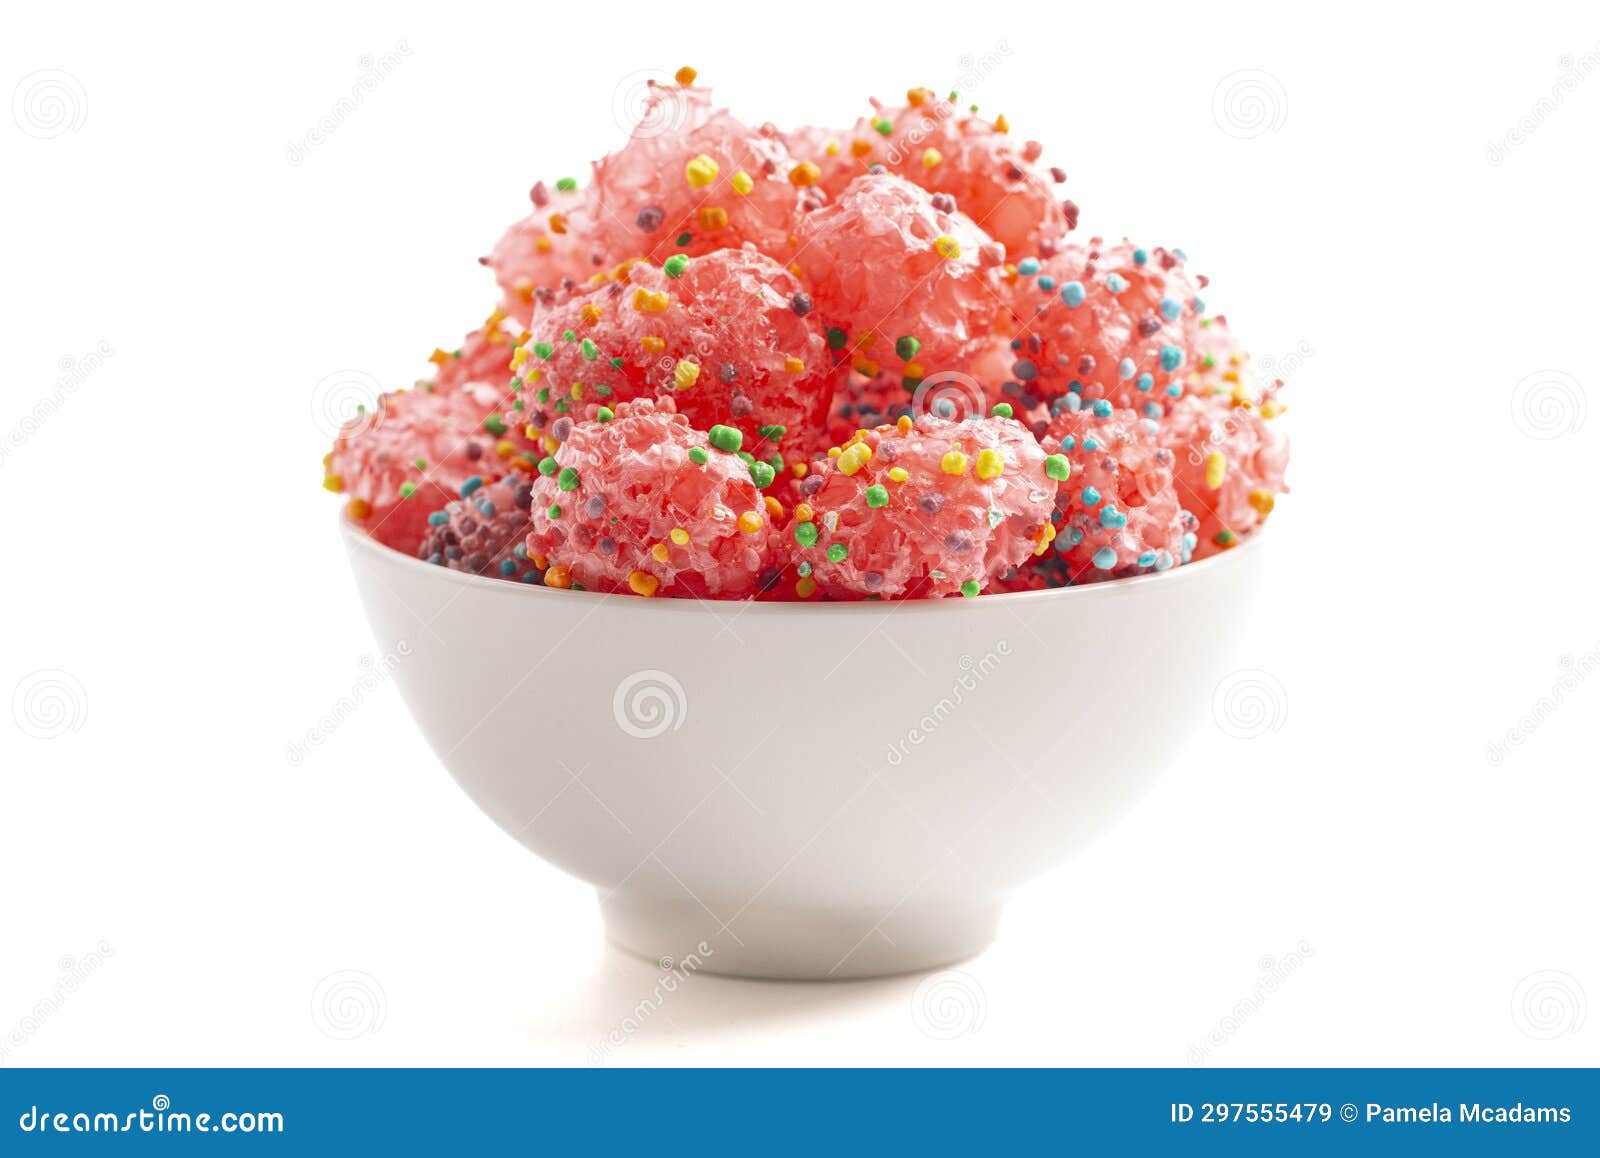 freeze dried sweet and tangy candy with small candies on the outside of a chewy center  on a white background